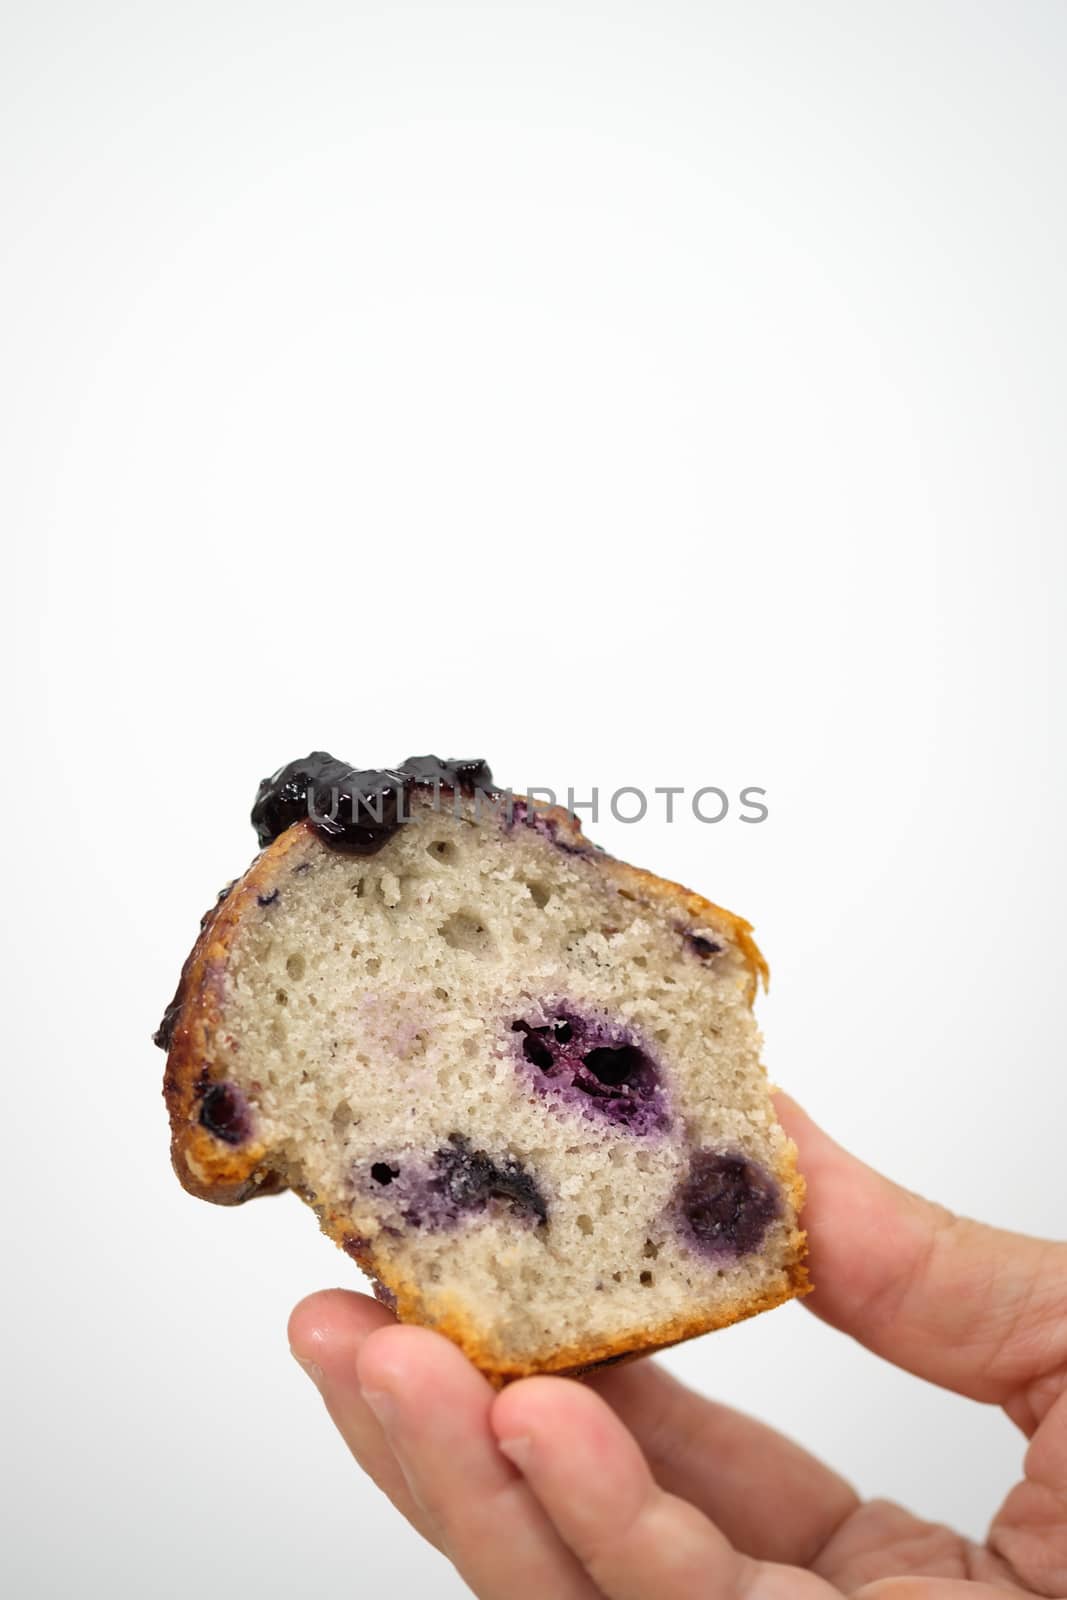 Hands holding a blueberry muffin look delicious. by feelartfeelant